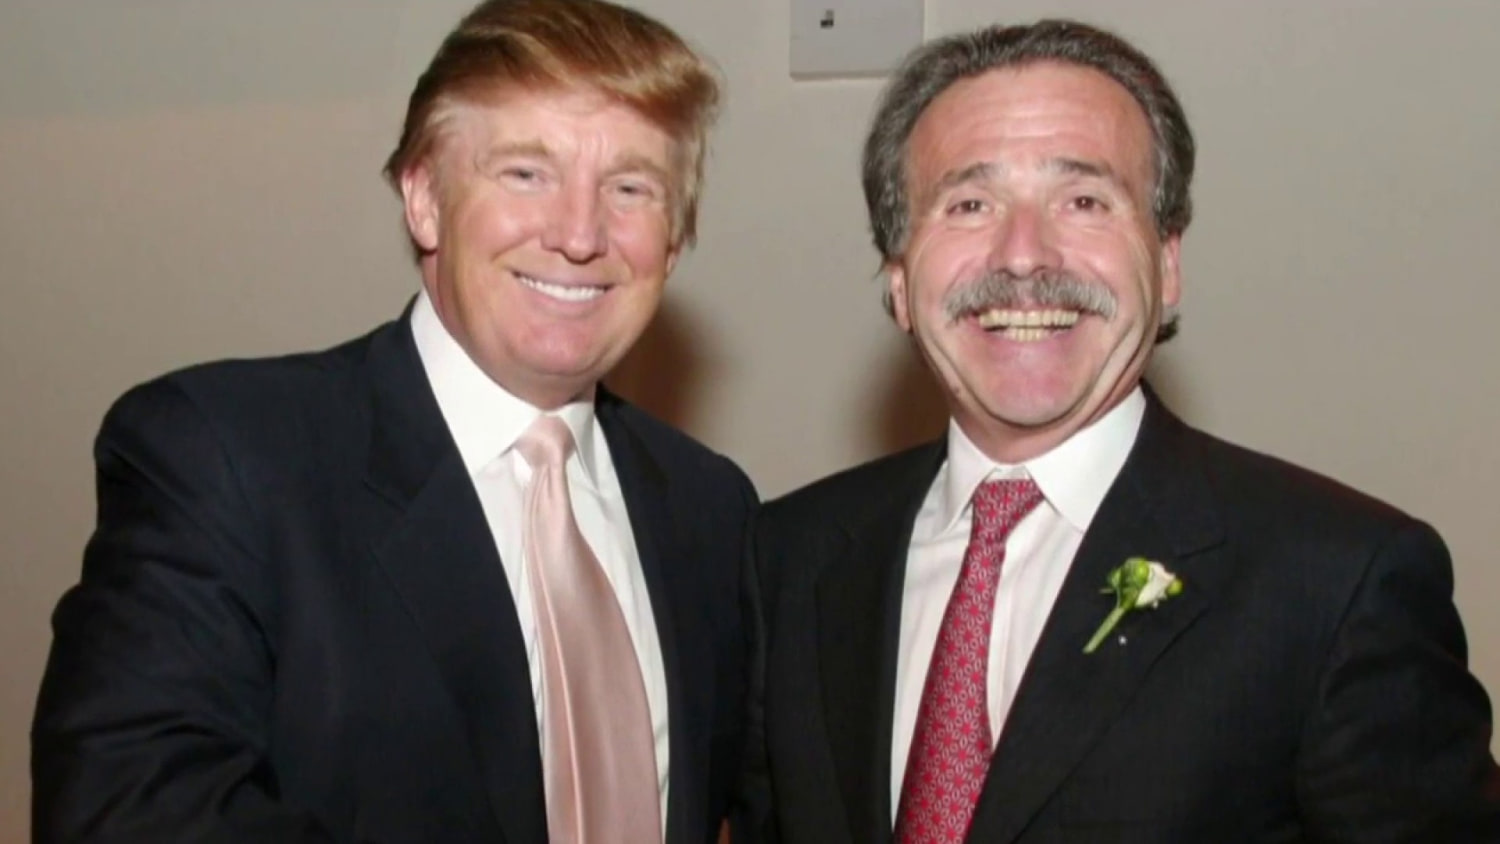 David Pecker admits 'catch-and-kill' scheme was to help Trump in 2016
election